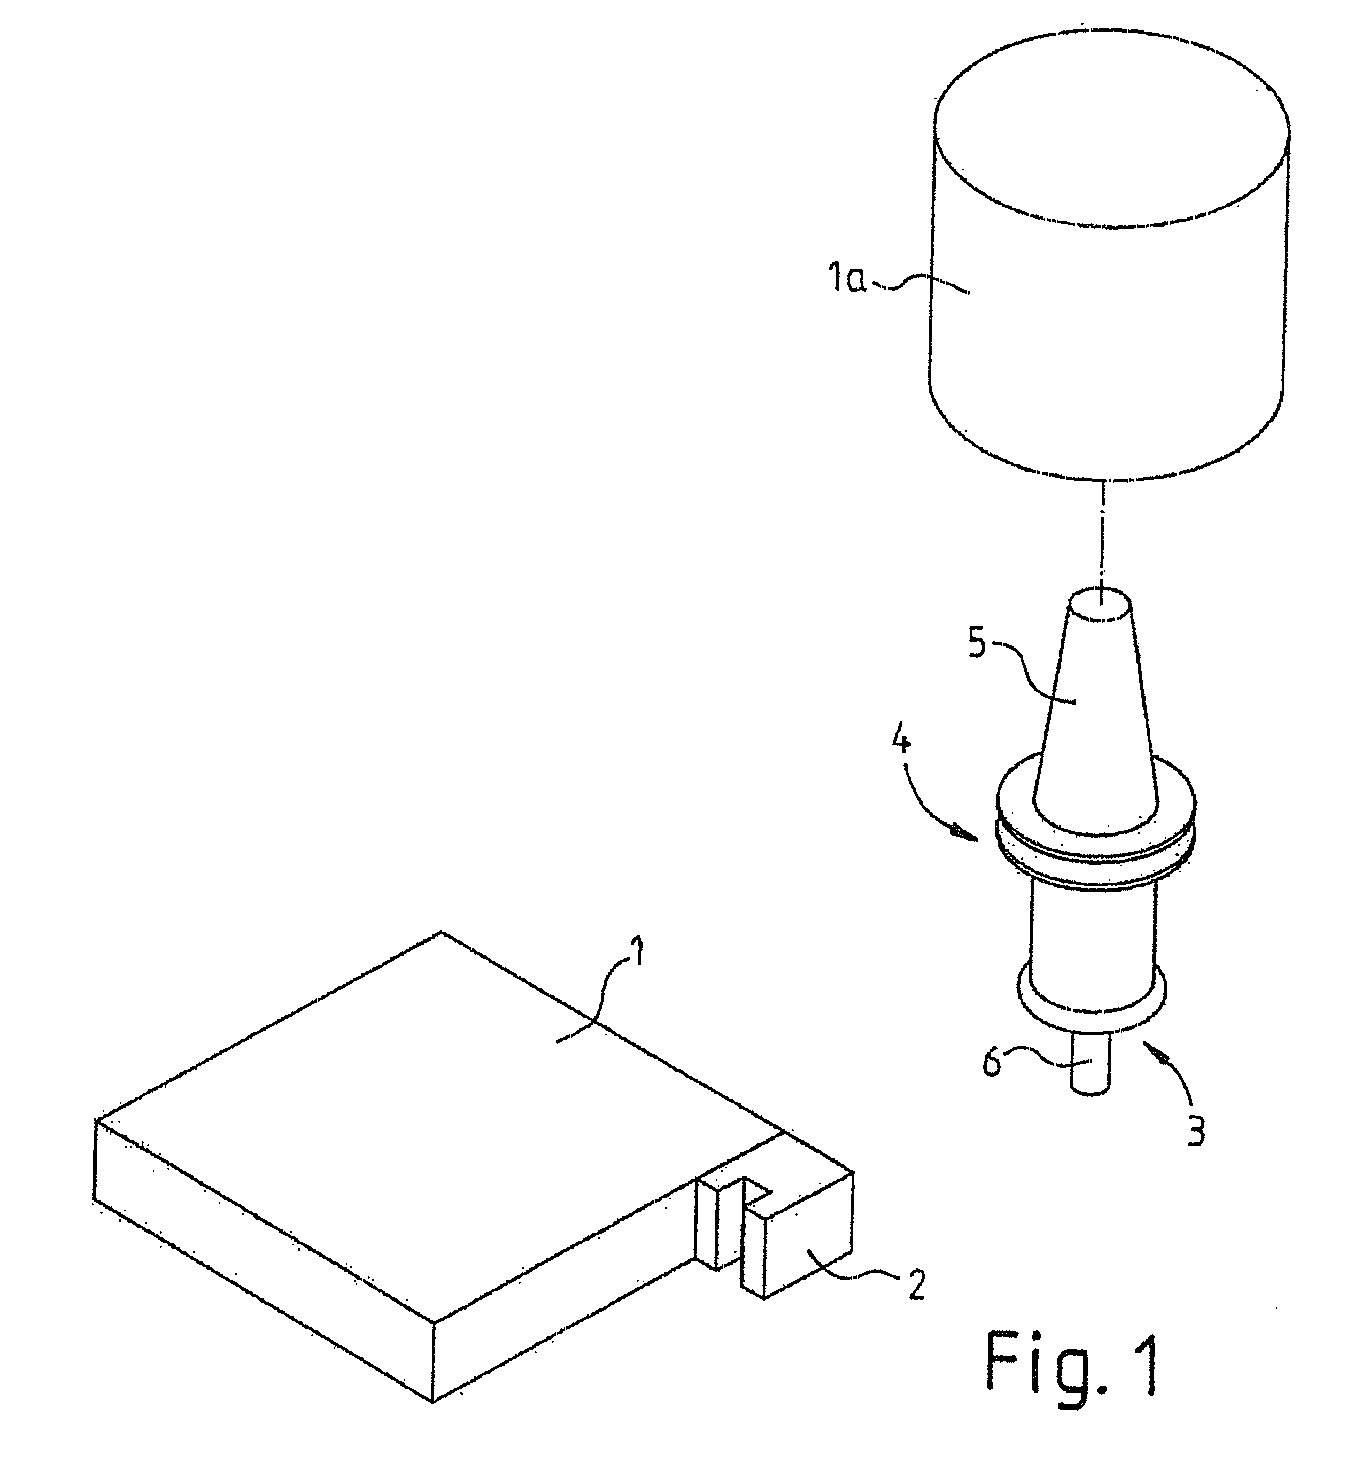 Method for measuring tools with a measuring device, and measuring apparatus with a measuring device for measuring tools